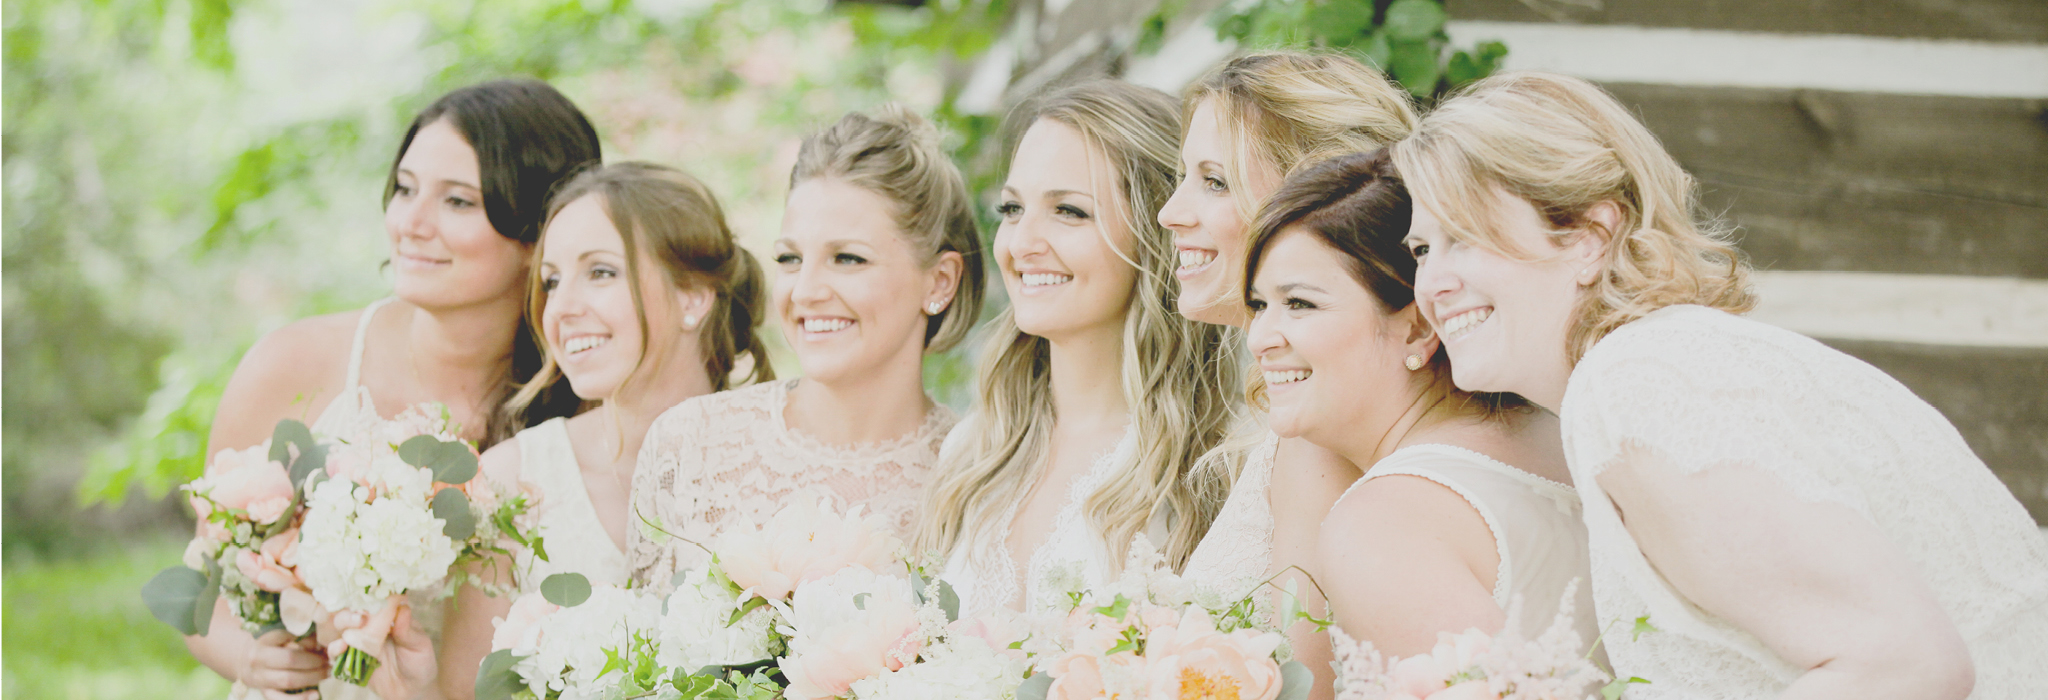 Photo of a bride and her bridesmaids.